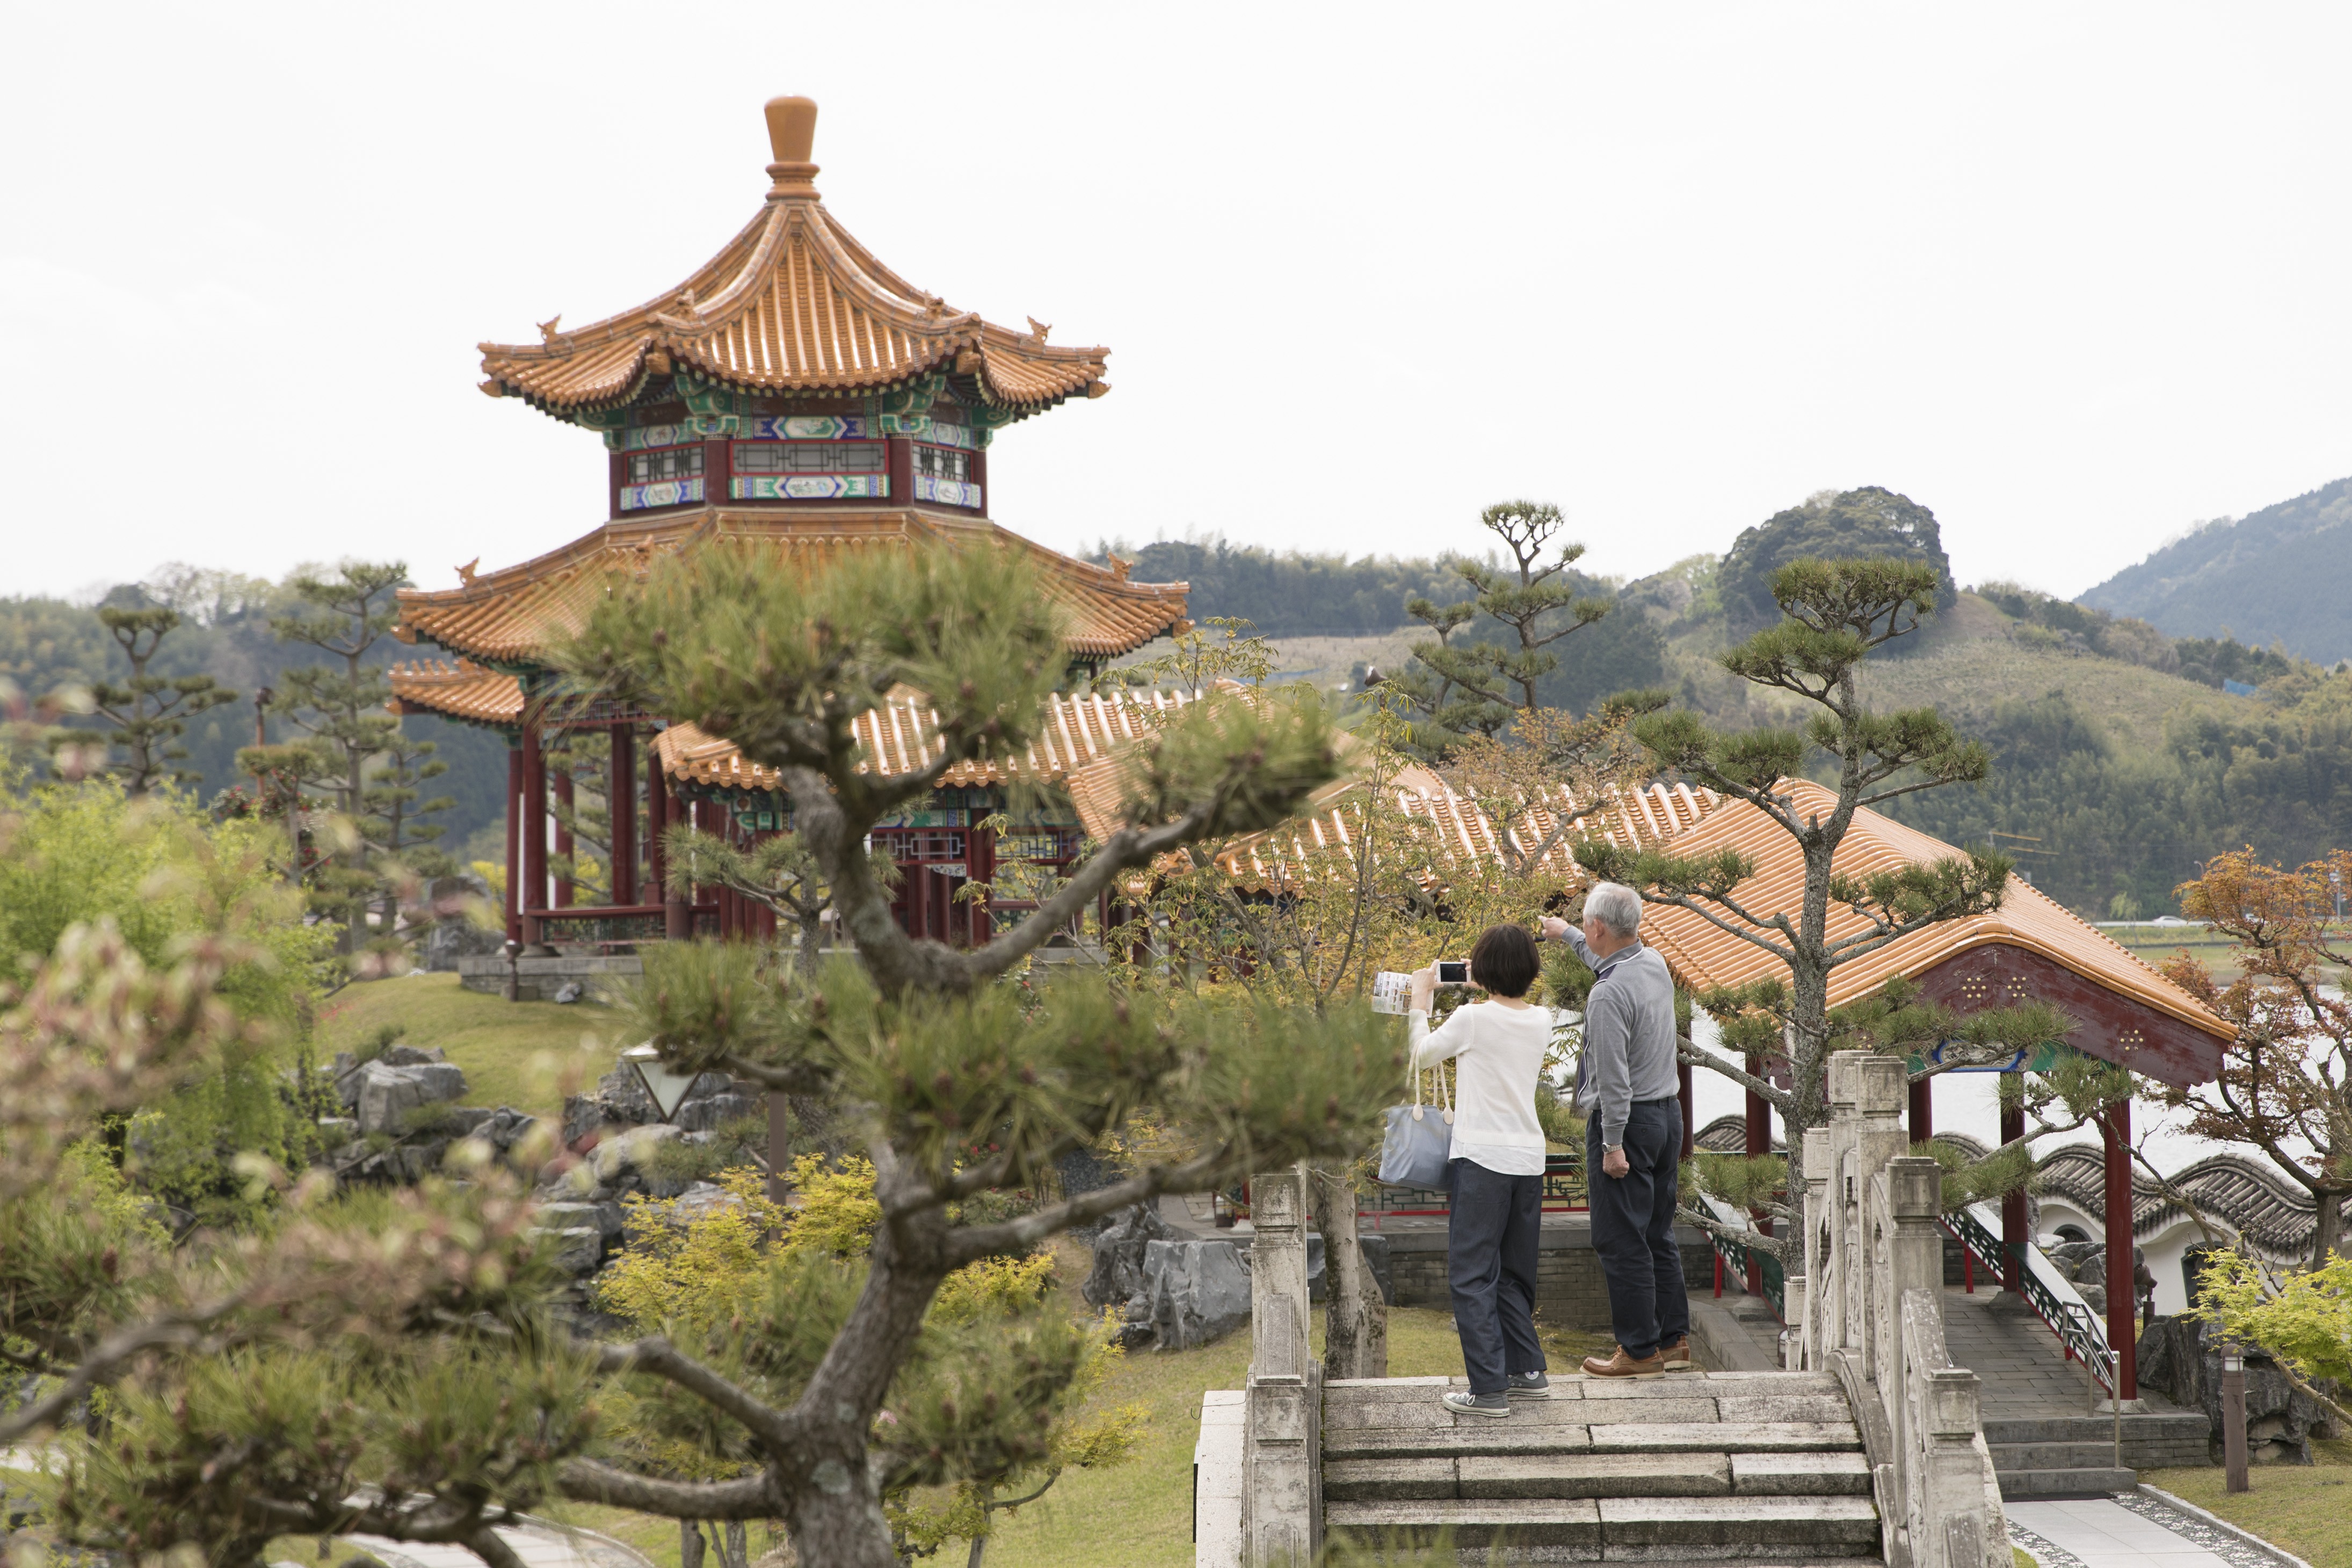 Tourists visit the Encho-en garden in Tottori, Japan, one of the biggest Chinese-style gardens in Japan, on April 18. Covering about 10,000 square metres, Encho-en was built in 1995 as a sign of friendship between Tottori and north China’s Hebei province. Photo: Xinhua